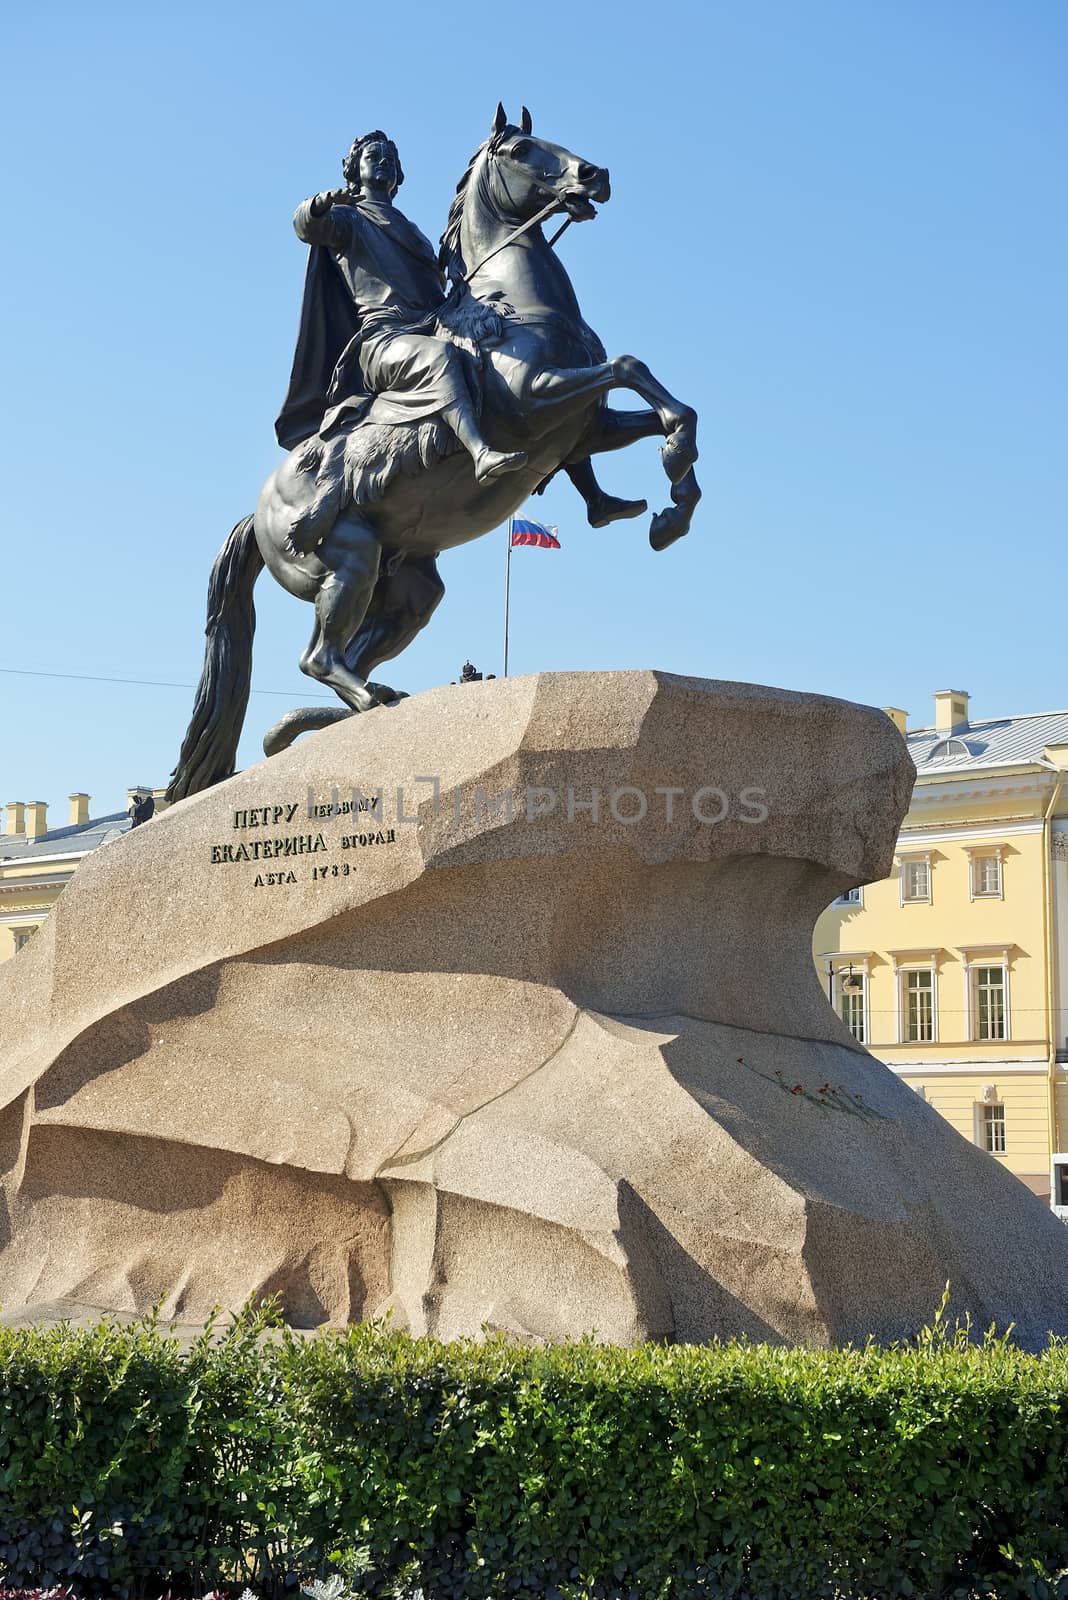 The Bronze Horseman, equestrian statue of Peter the Great in Saint Petersburg, Russia. Commissioned by Catherine the Great, it was created by french sculptor Etienne Maurice Falconet